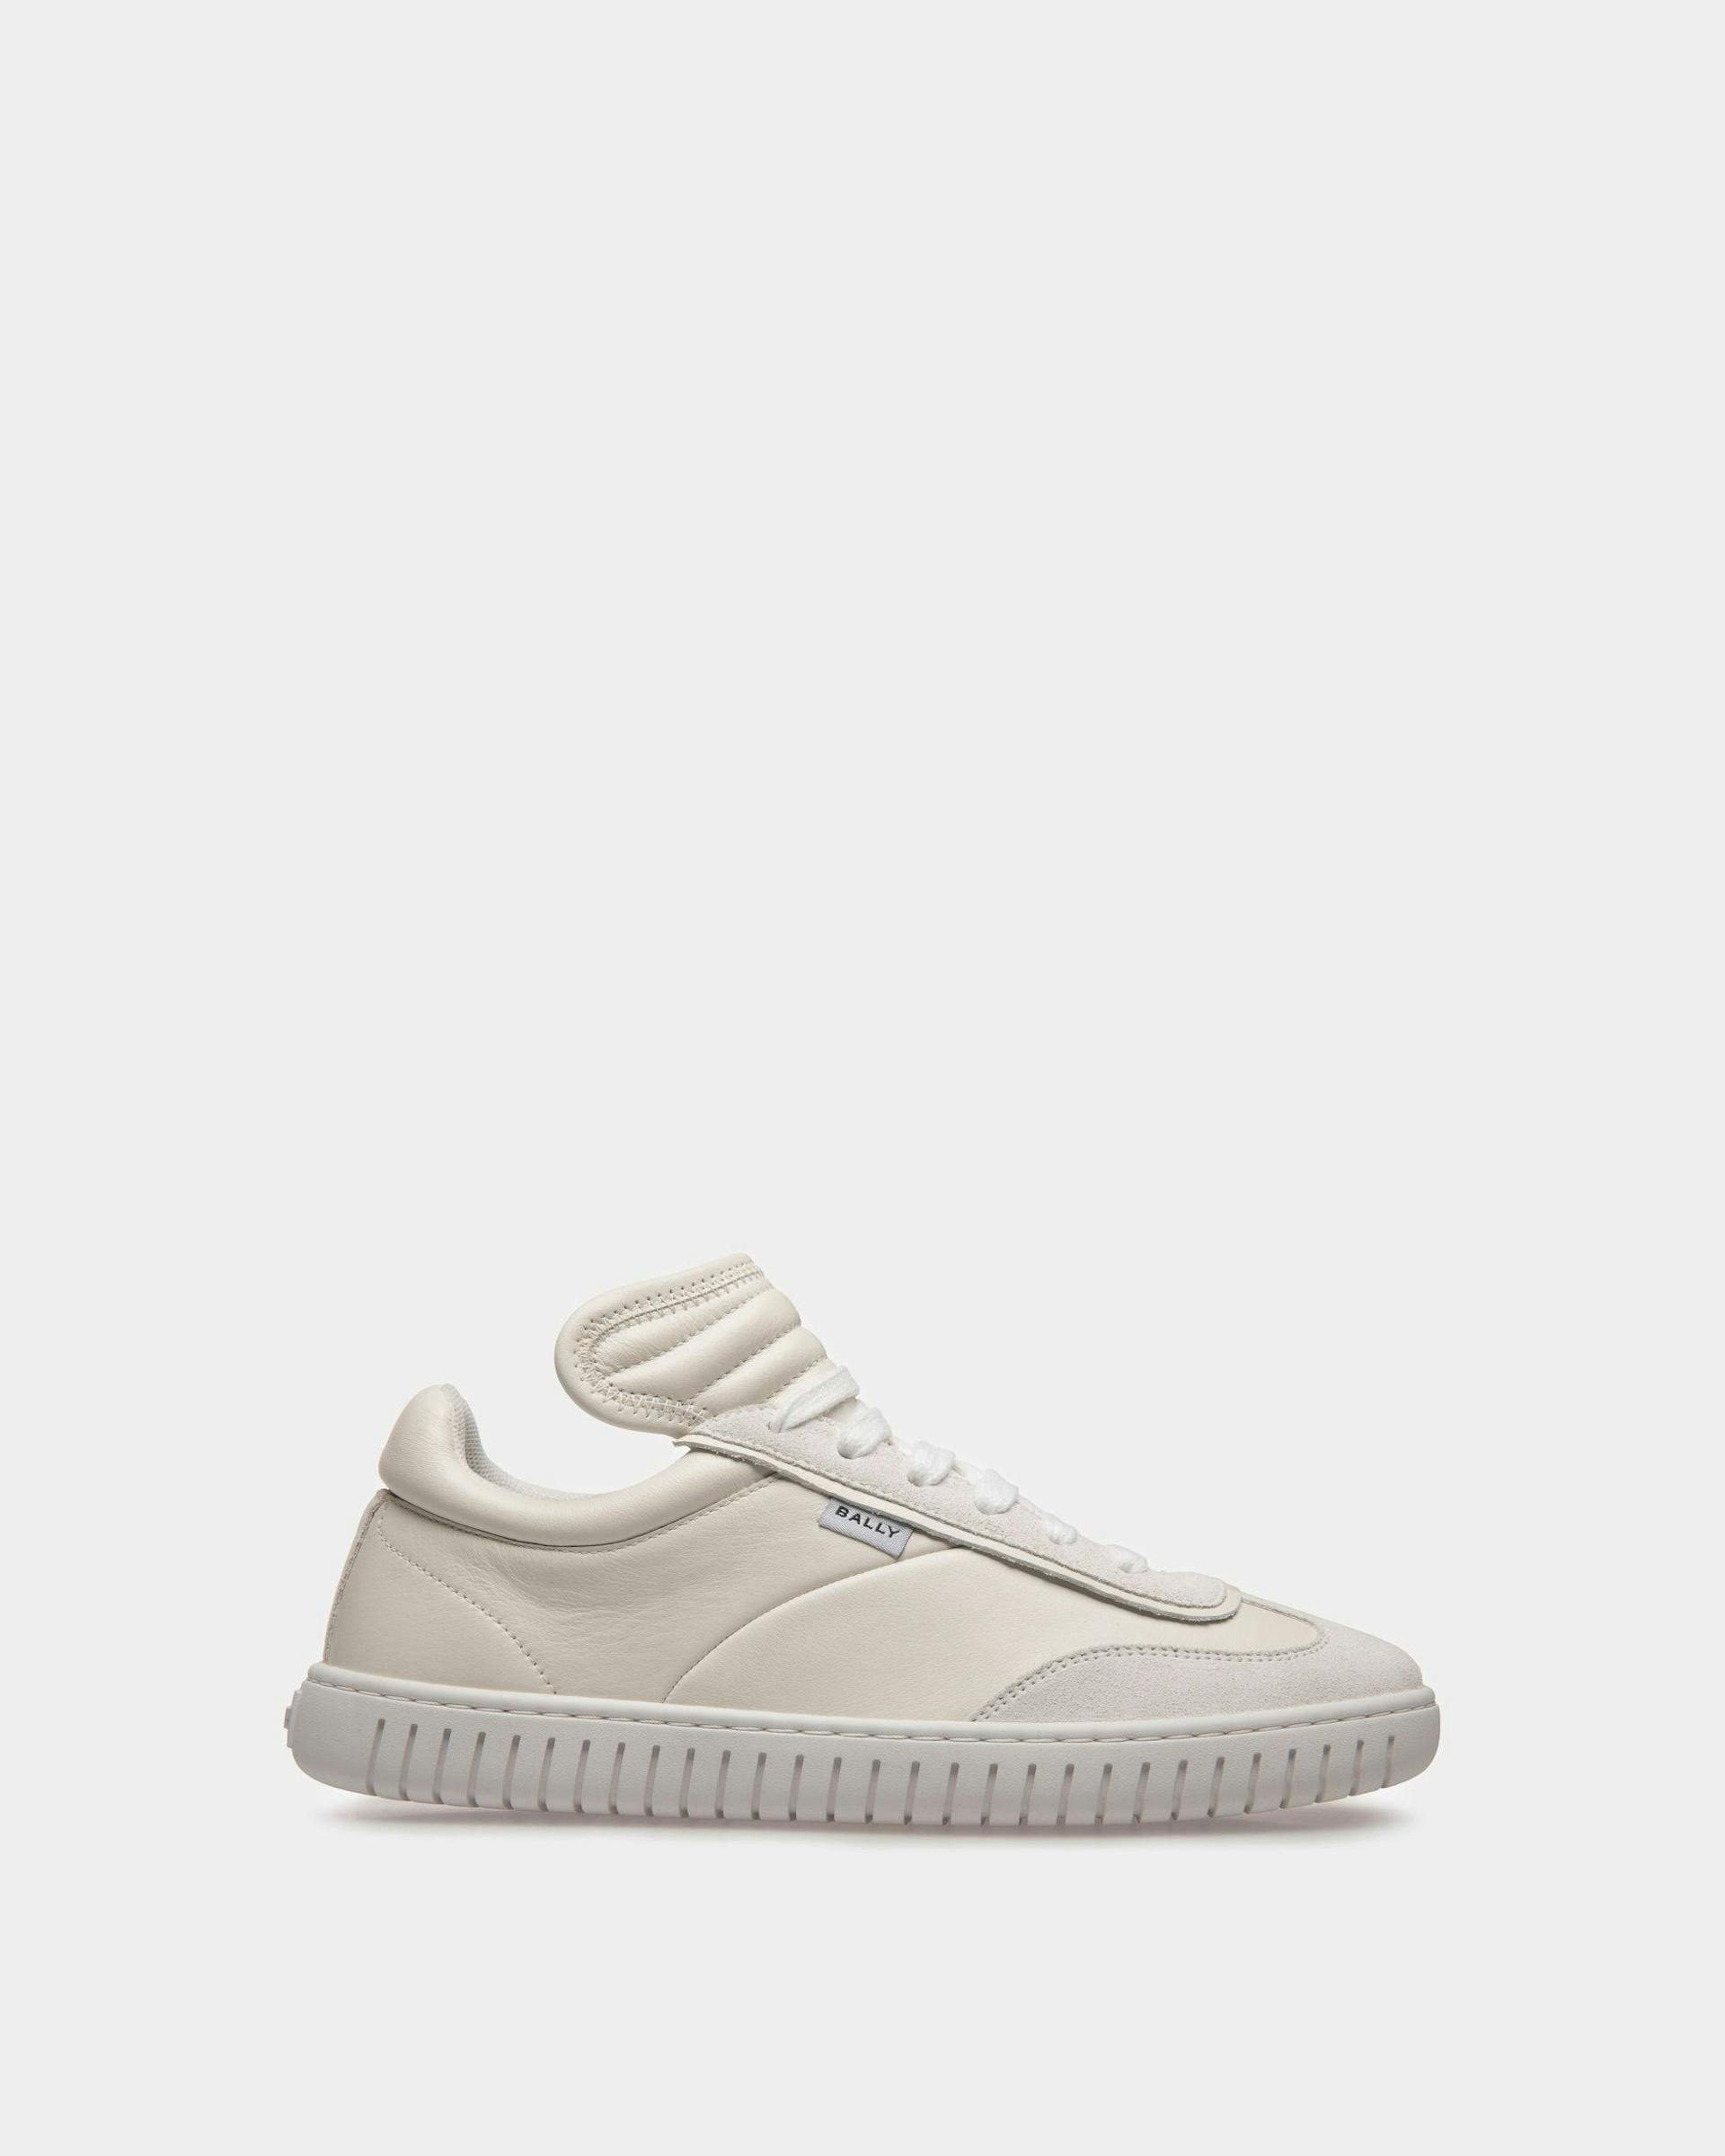 Player Sneakers In White Leather - Women's - Bally - 01